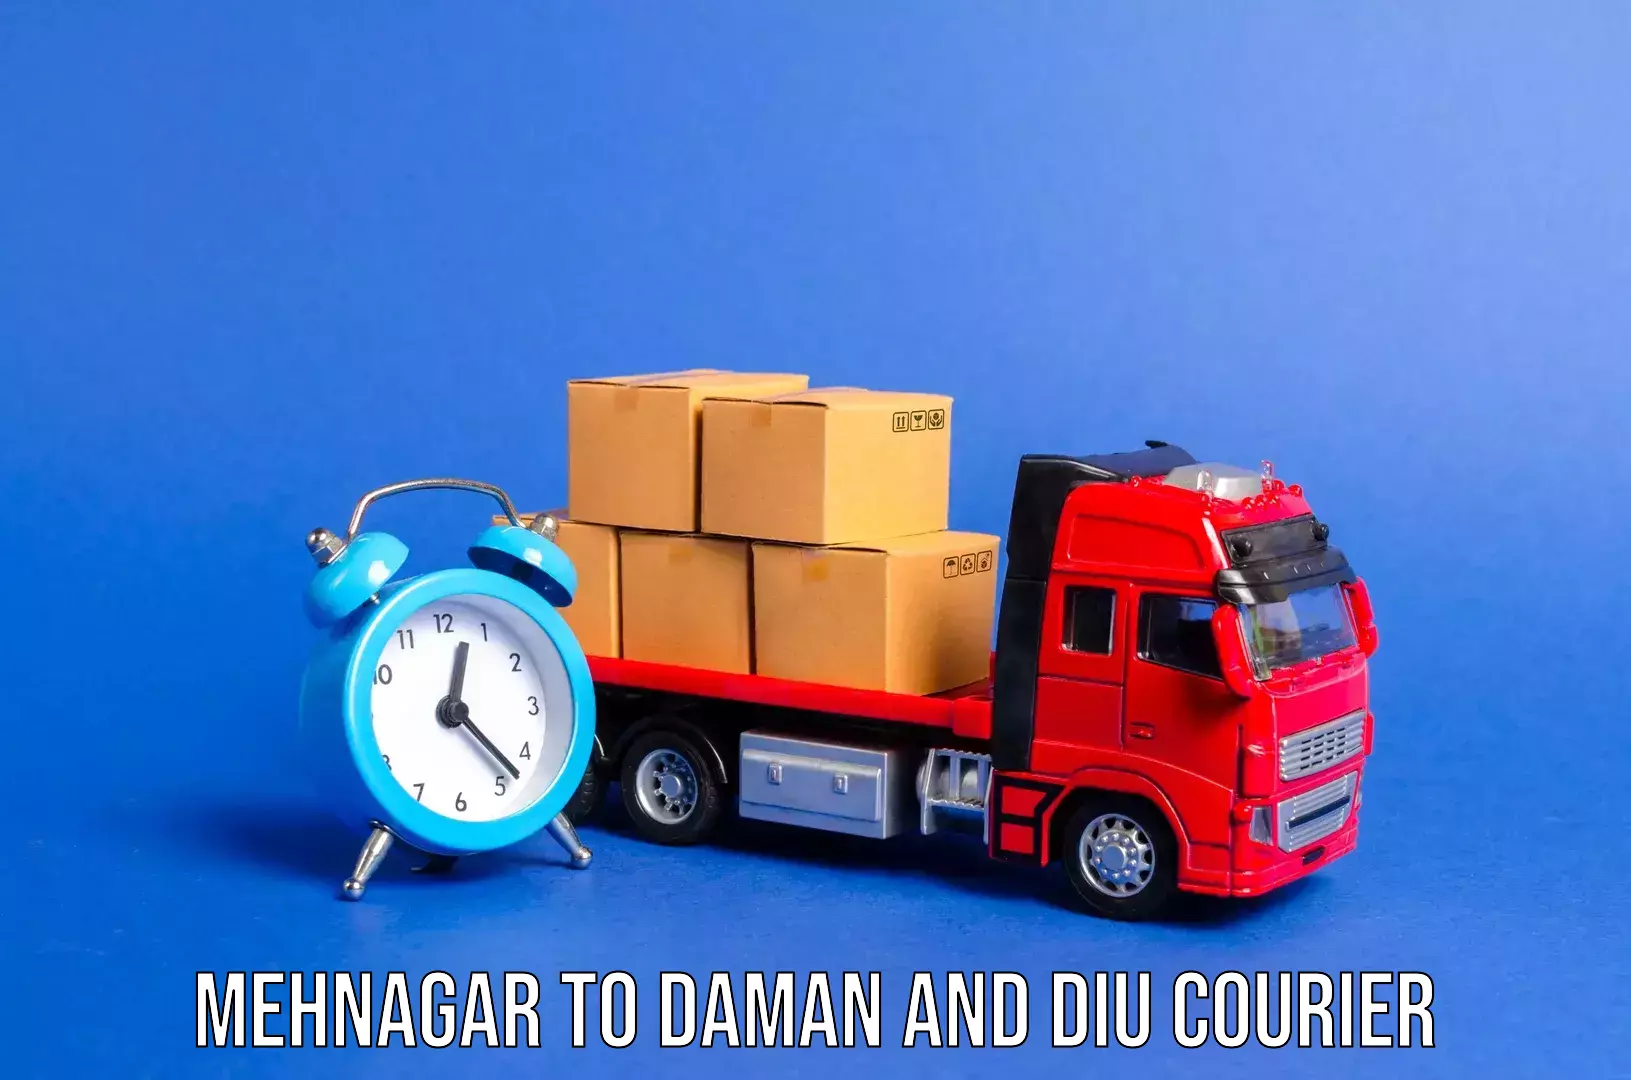 Luggage shipment specialists Mehnagar to Daman and Diu